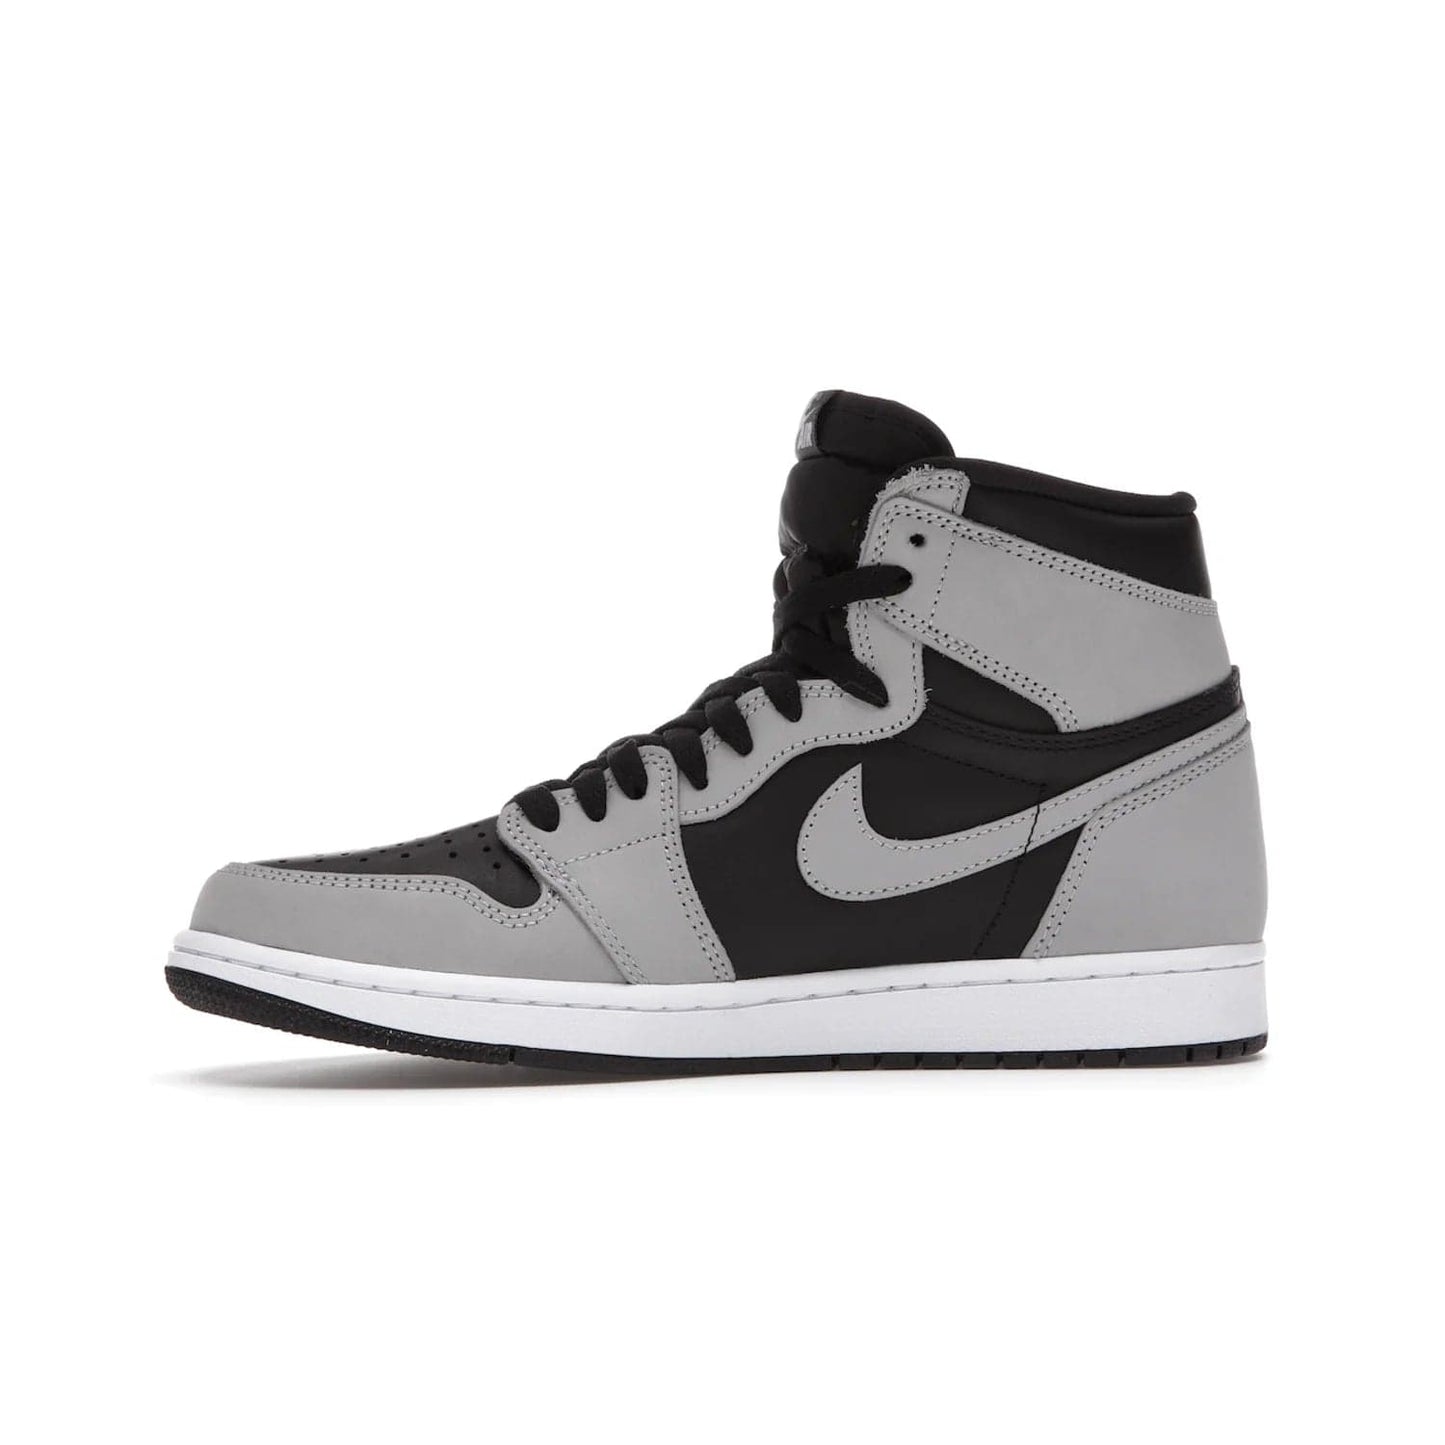 Jordan 1 Retro High Shadow 2.0 - Image 18 - Only at www.BallersClubKickz.com - #
Classic Air Jordan 1 Retro High Shadow 2.0 with black leather base and Light Smoke Grey overlays. Released in May 2021.